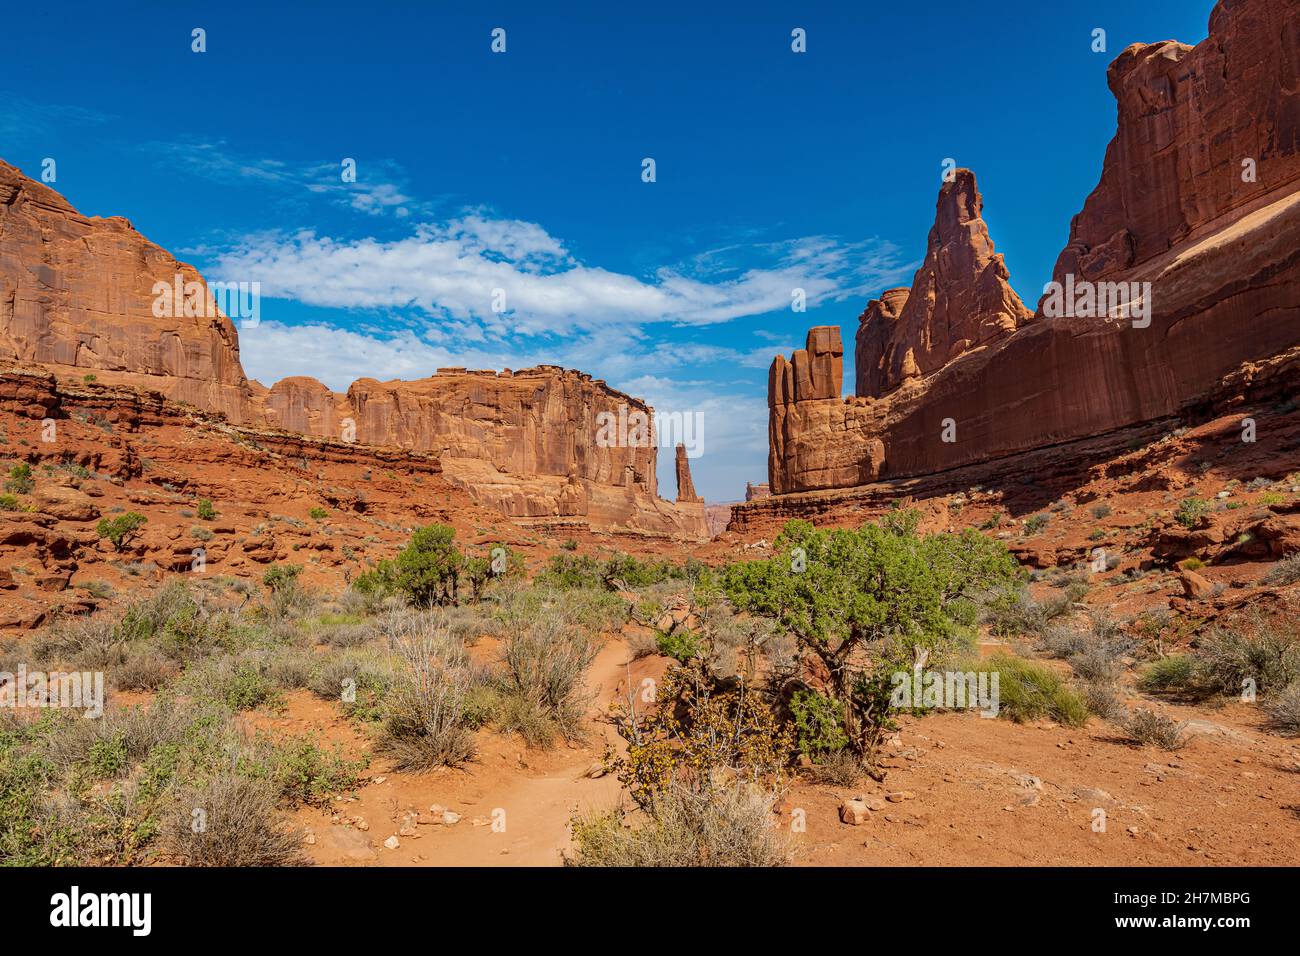 The park avenue trail goes between towering red rocks. Stock Photo